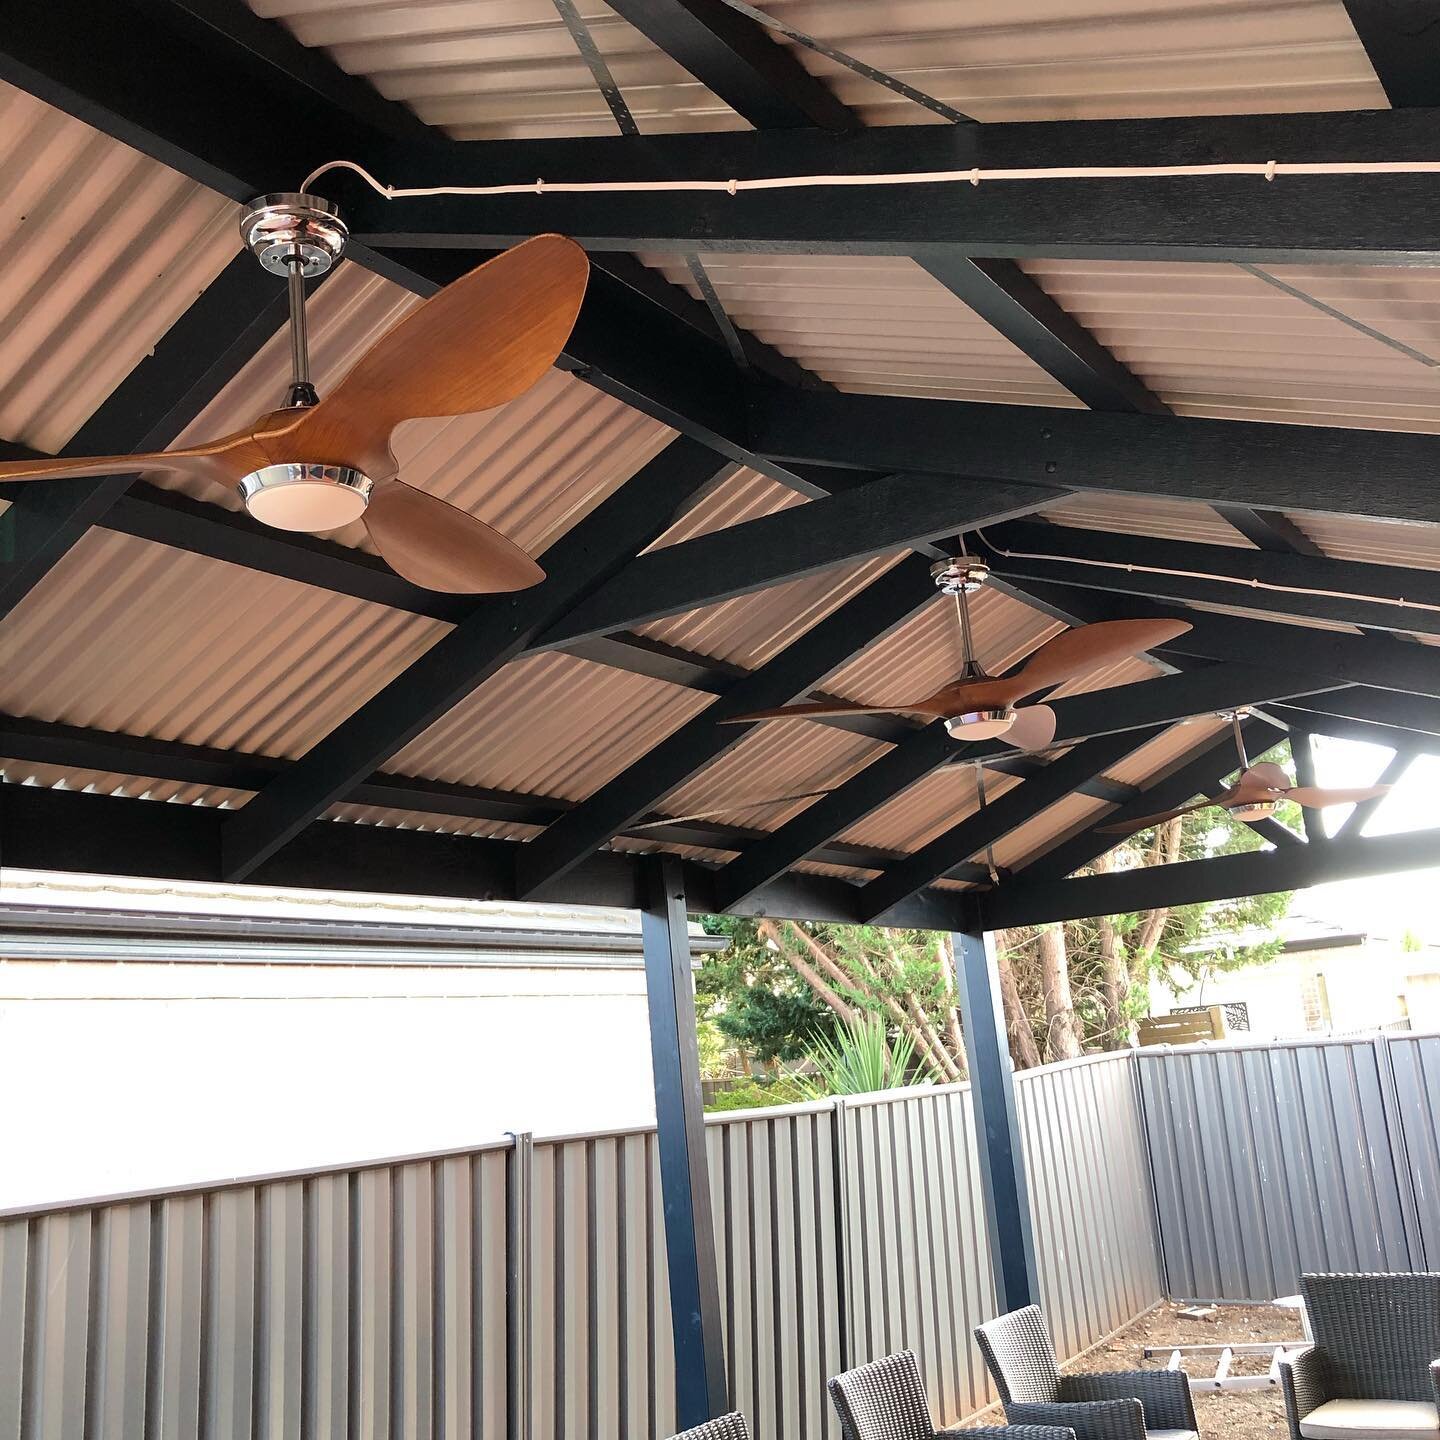 fans were the order of the day. Another happy customer. ⚡️

#elec #melbourneelectrician #electrician #electricians #electrical #contractor #renovation #sparky #sparkie #jobsite #job #worksite #construction #trade #tradie #work #home #developer #build